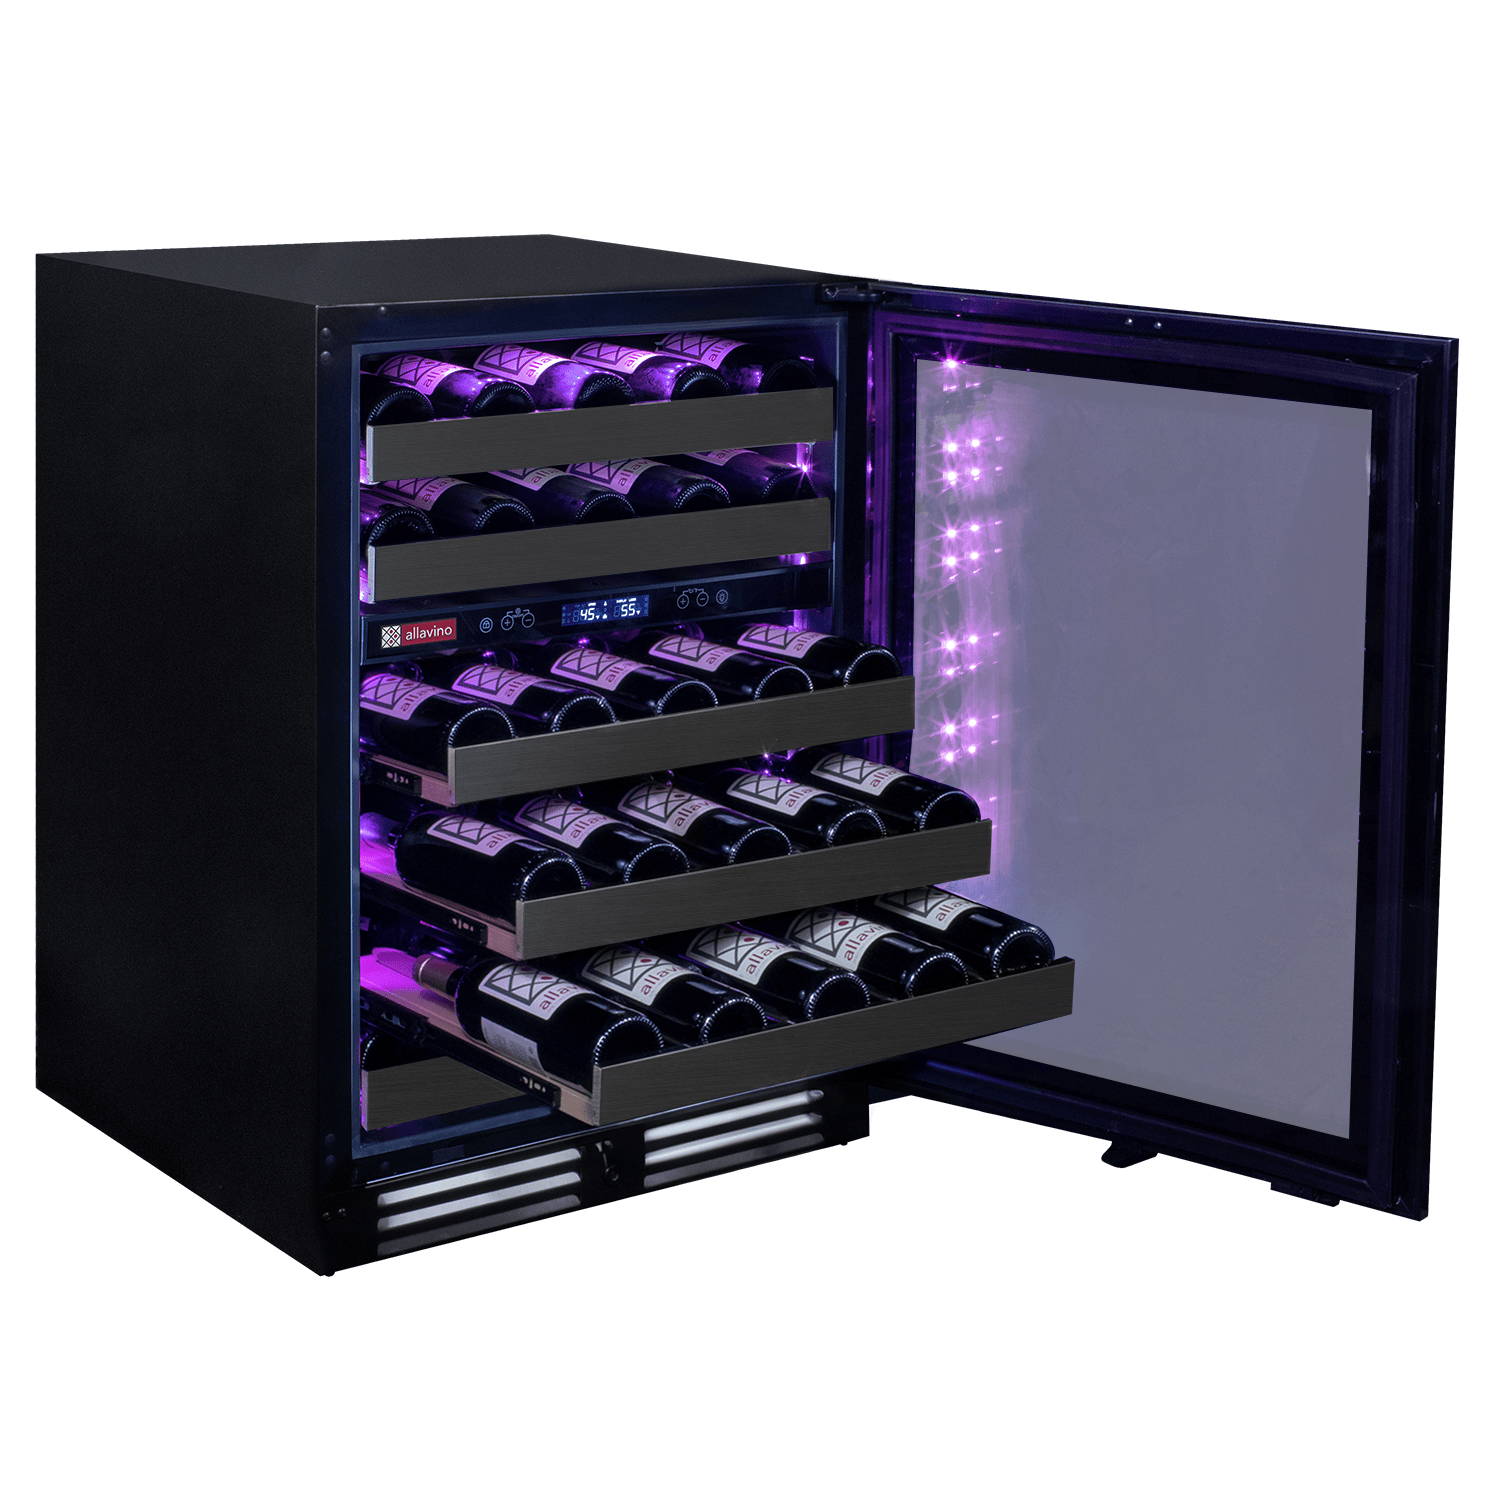 Allavino Reserva 50 Bottle Dual Zone Right Hinge Wine Refrigerator BDW5034D-2BSR Wine Coolers BDW5034D-2BSR Luxury Appliances Direct